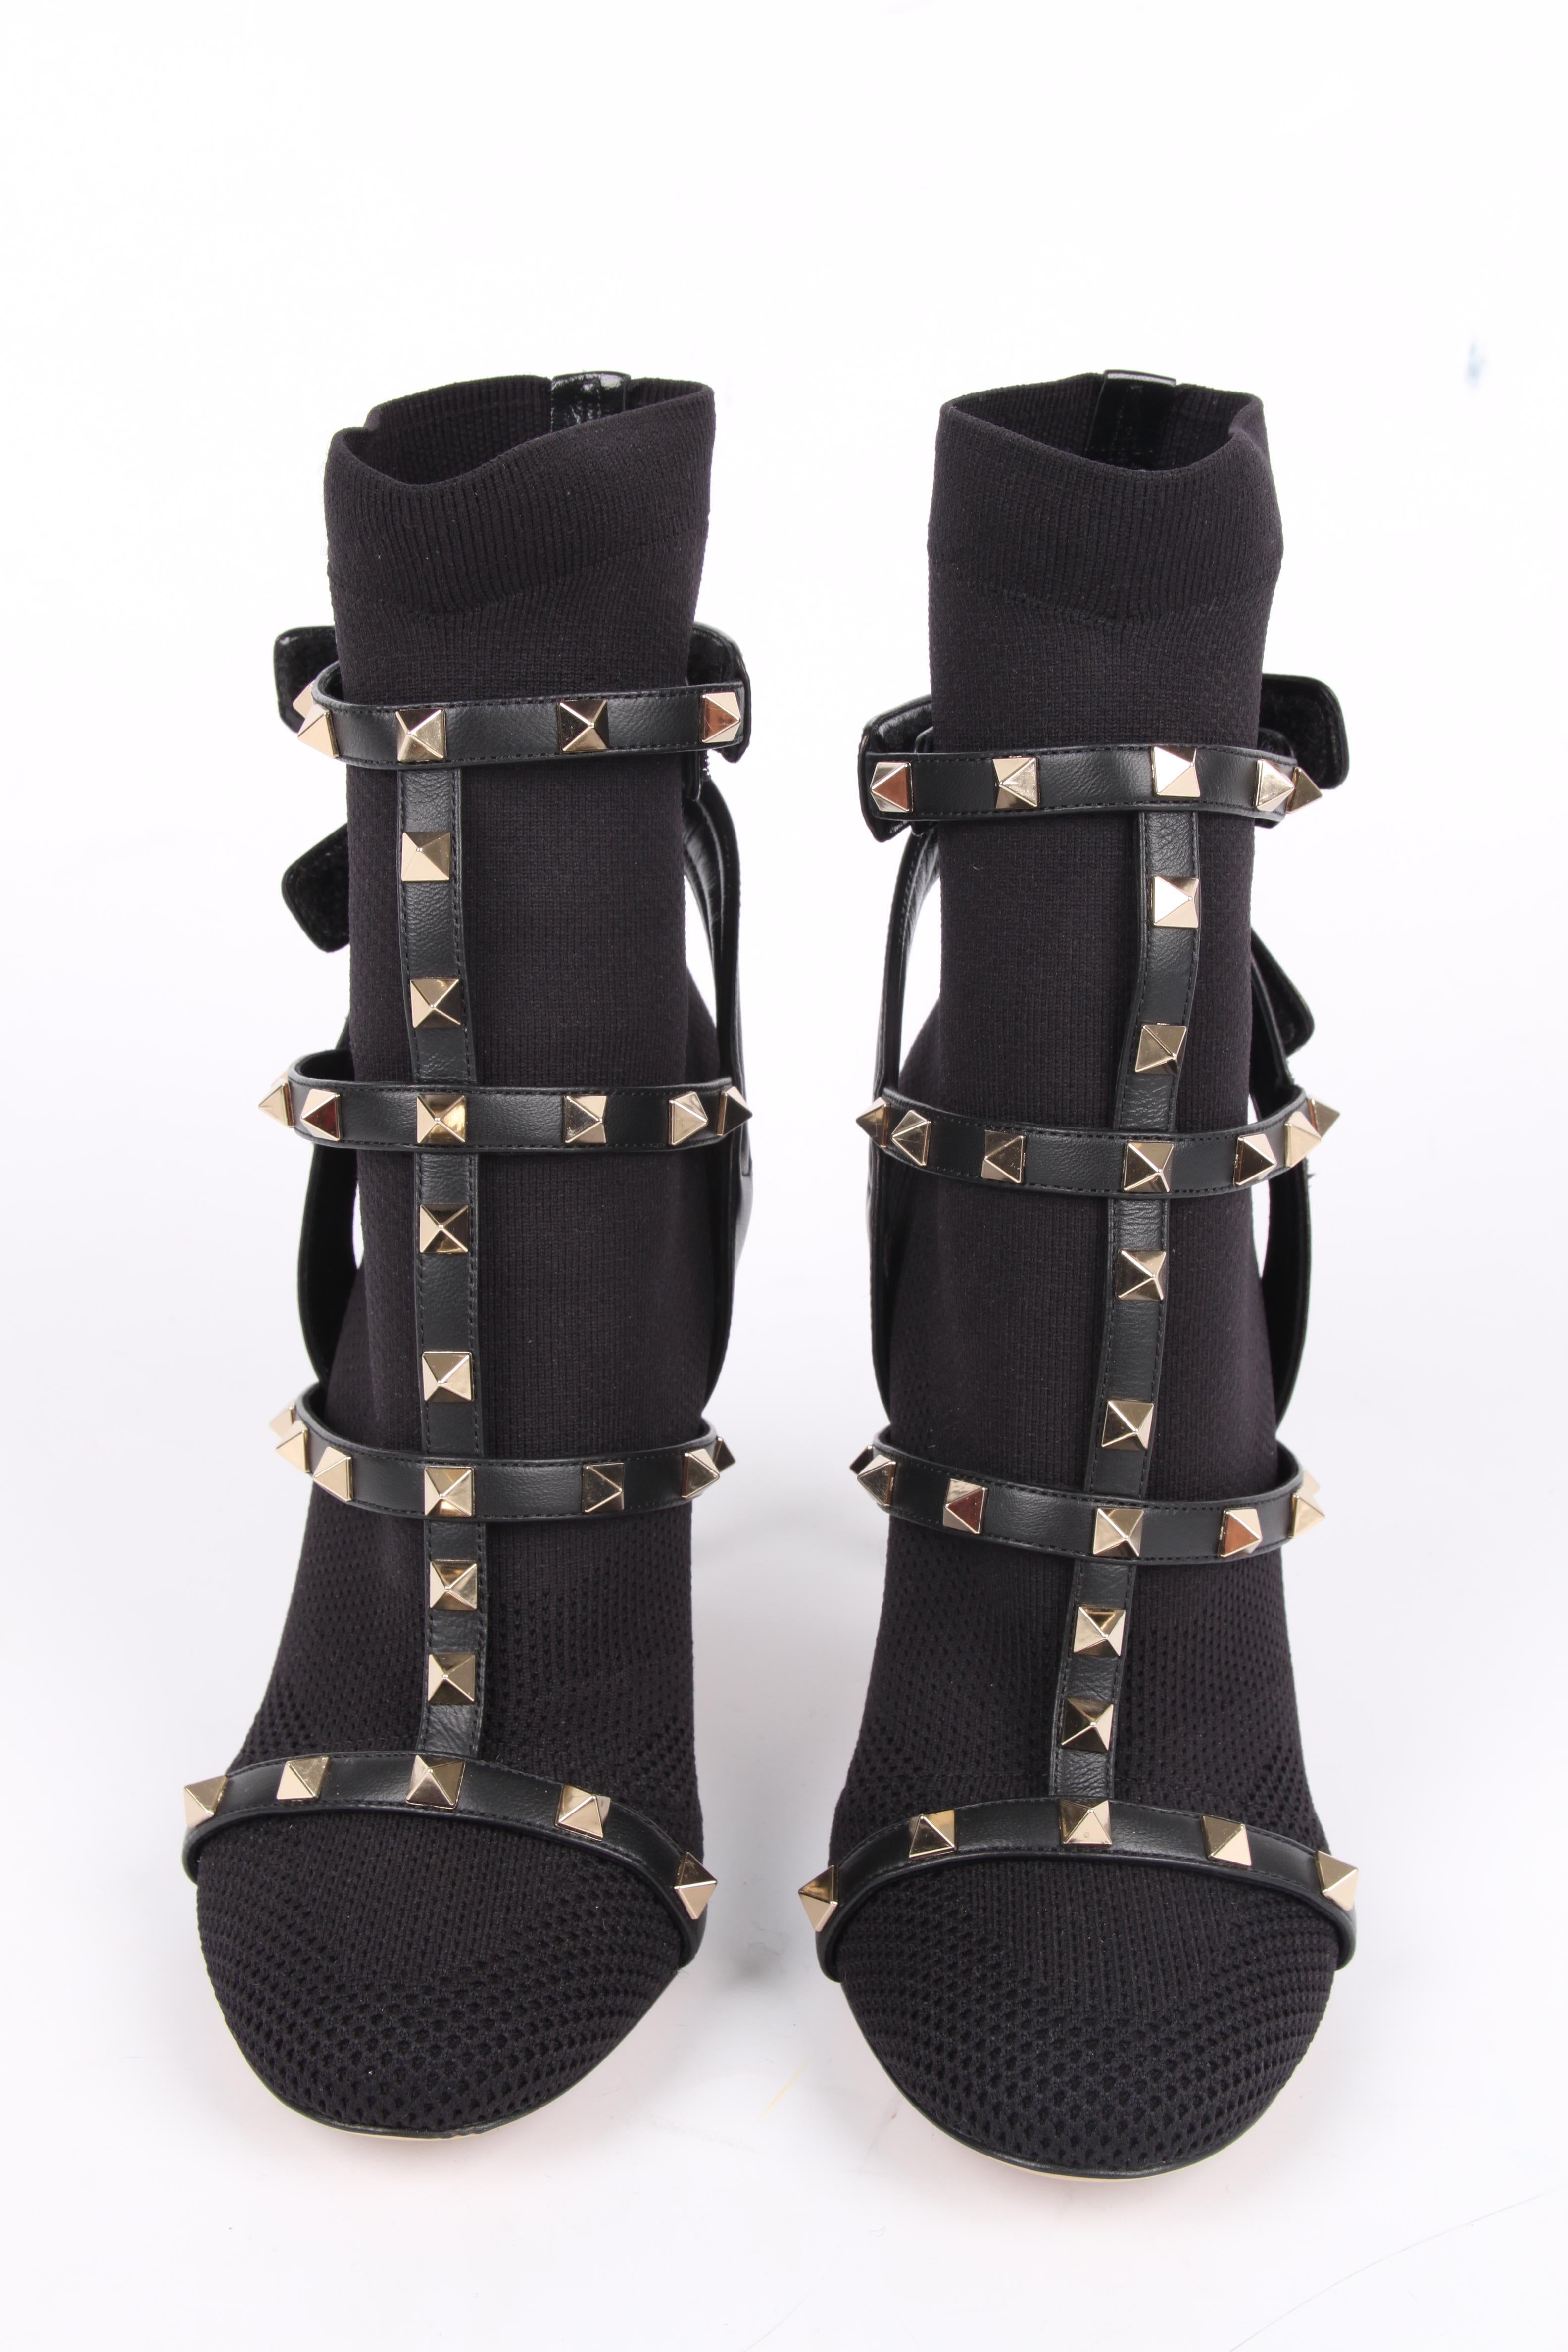 Wowww!! Stunning Valentino Rockstuds booties, we like!

Crafted from stretch-knit material, a round toe and a straight heel that measures 10,5 centimeters. Velcro closure straps around the ankle. The bootie is decorated with leather straps